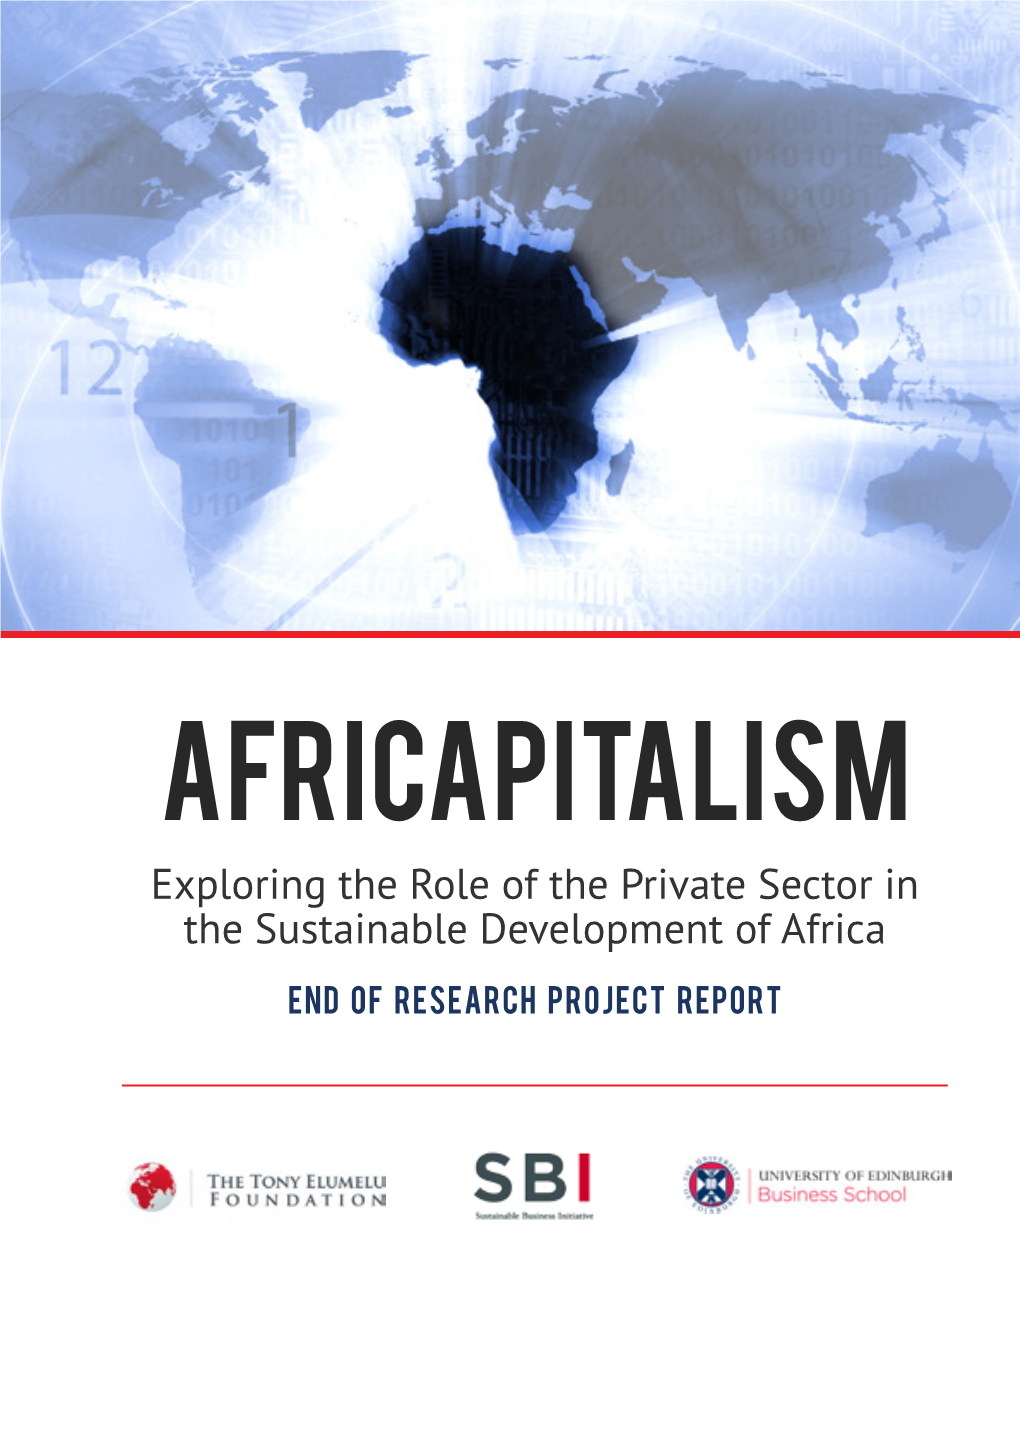 Africapitalism Exploring the Role of the Private Sector in the Sustainable Development of Africa